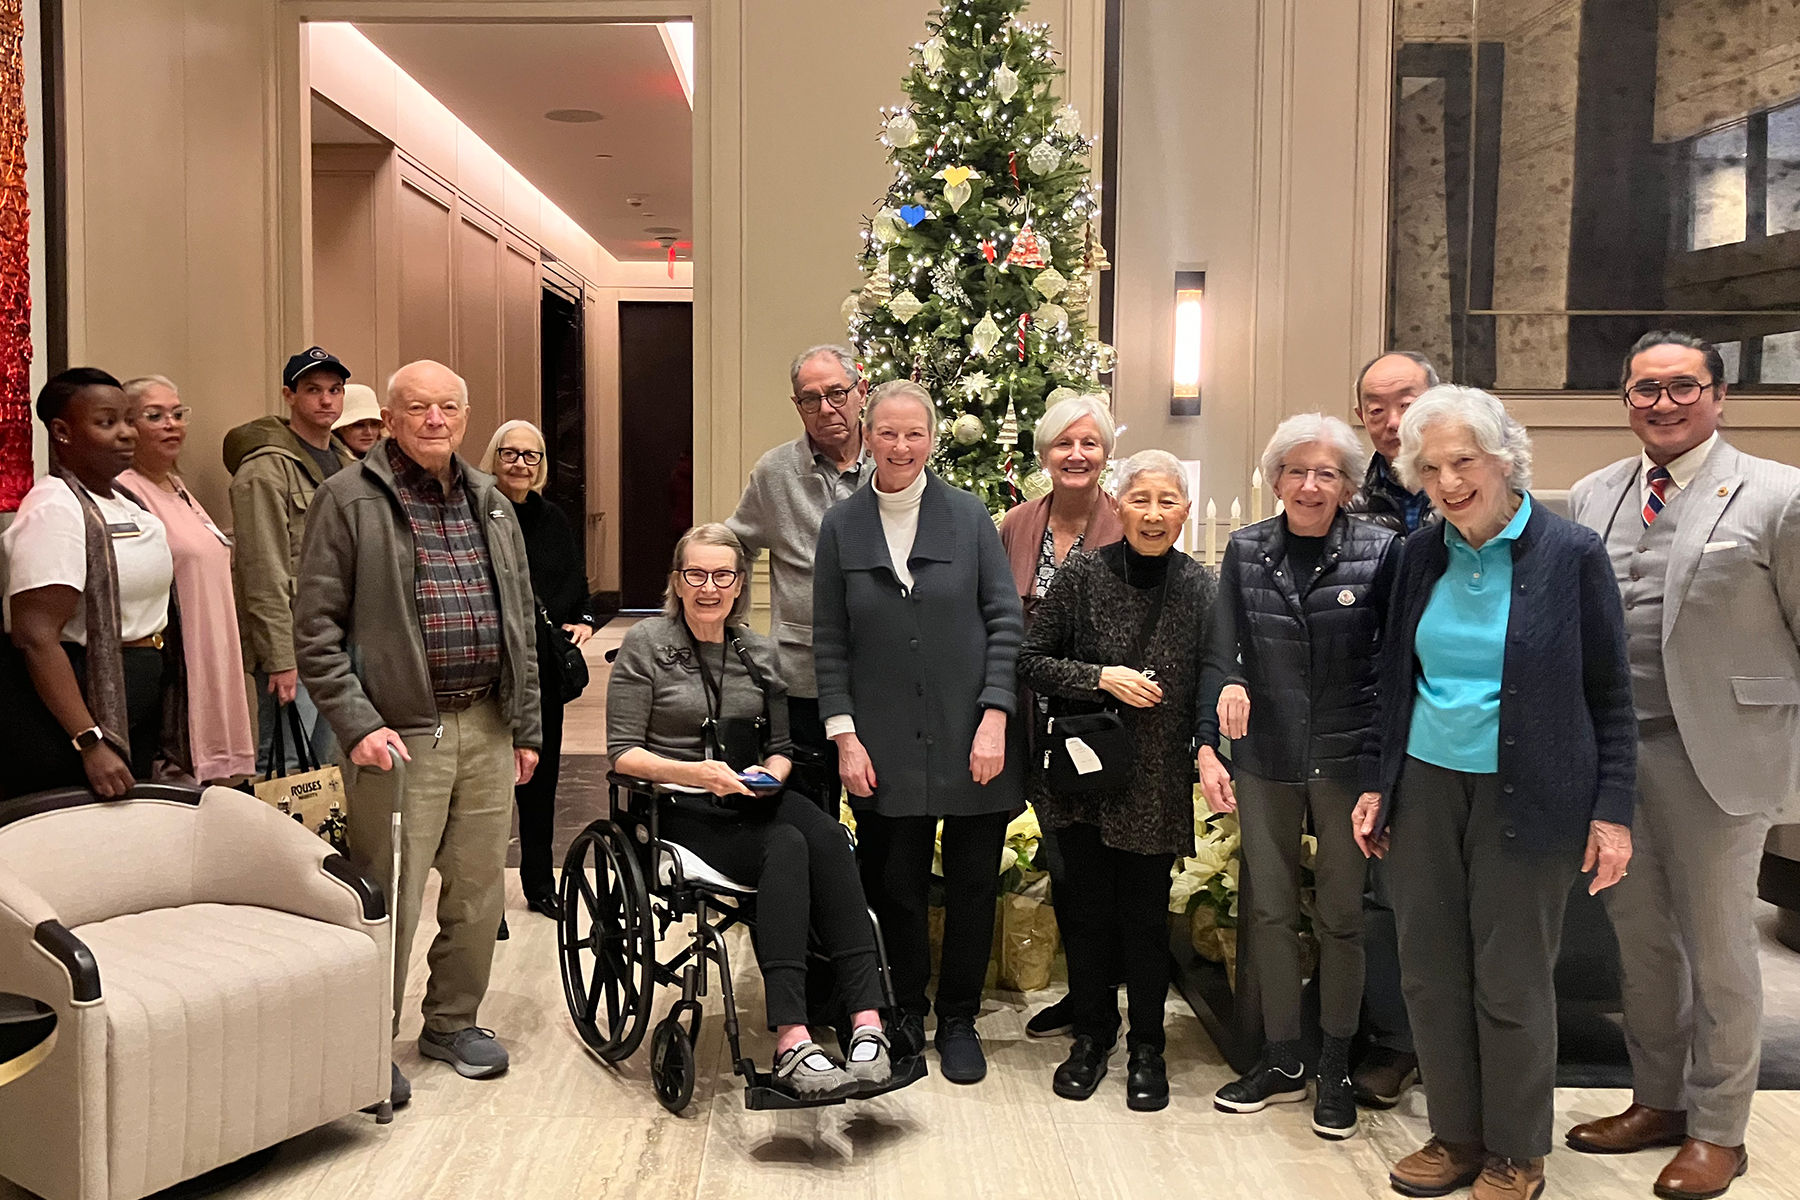 Coterie Hudson Yards residents photograph together at holiday party